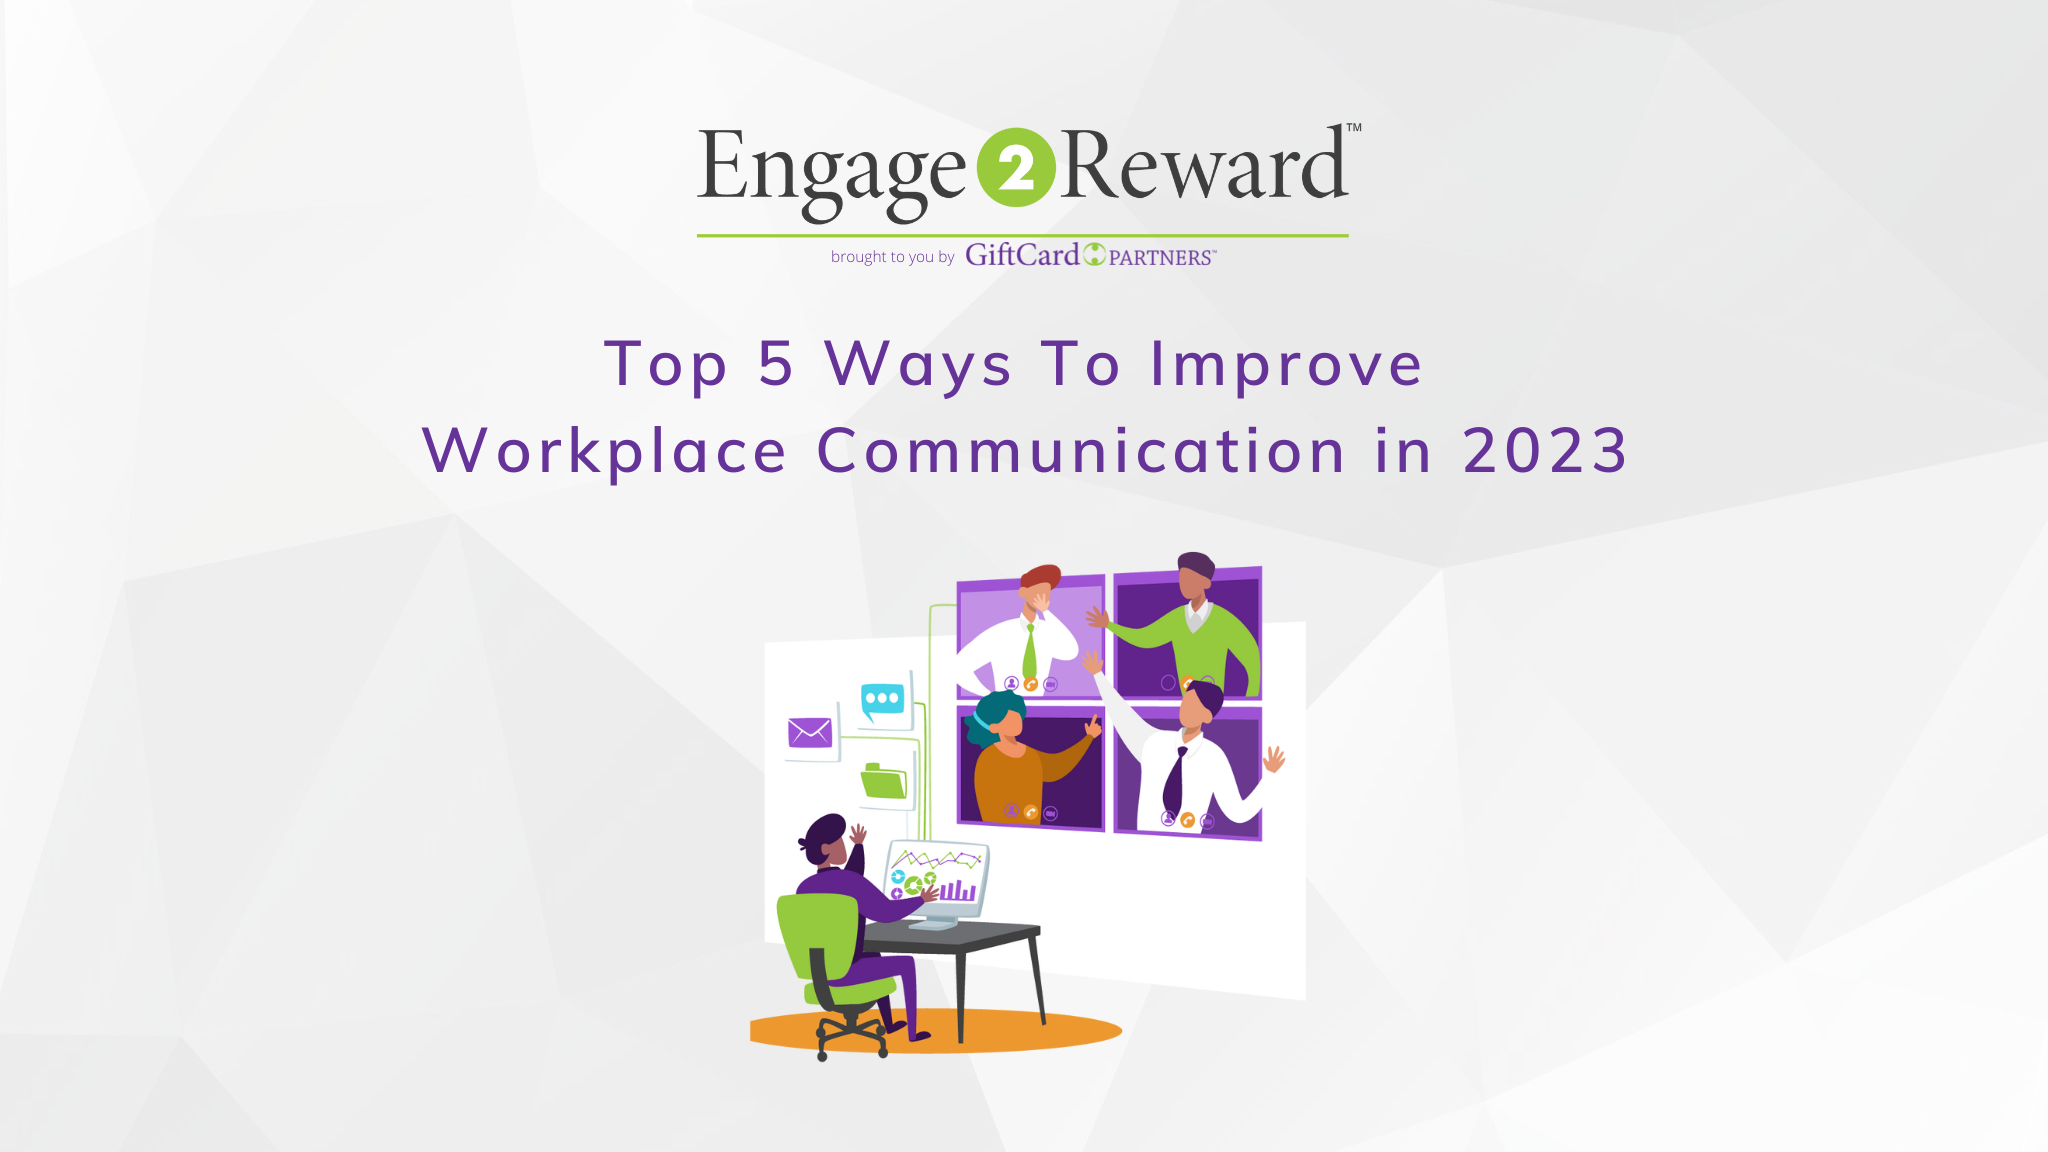 Top 5 Ways To Improve Workplace Communication in 2023